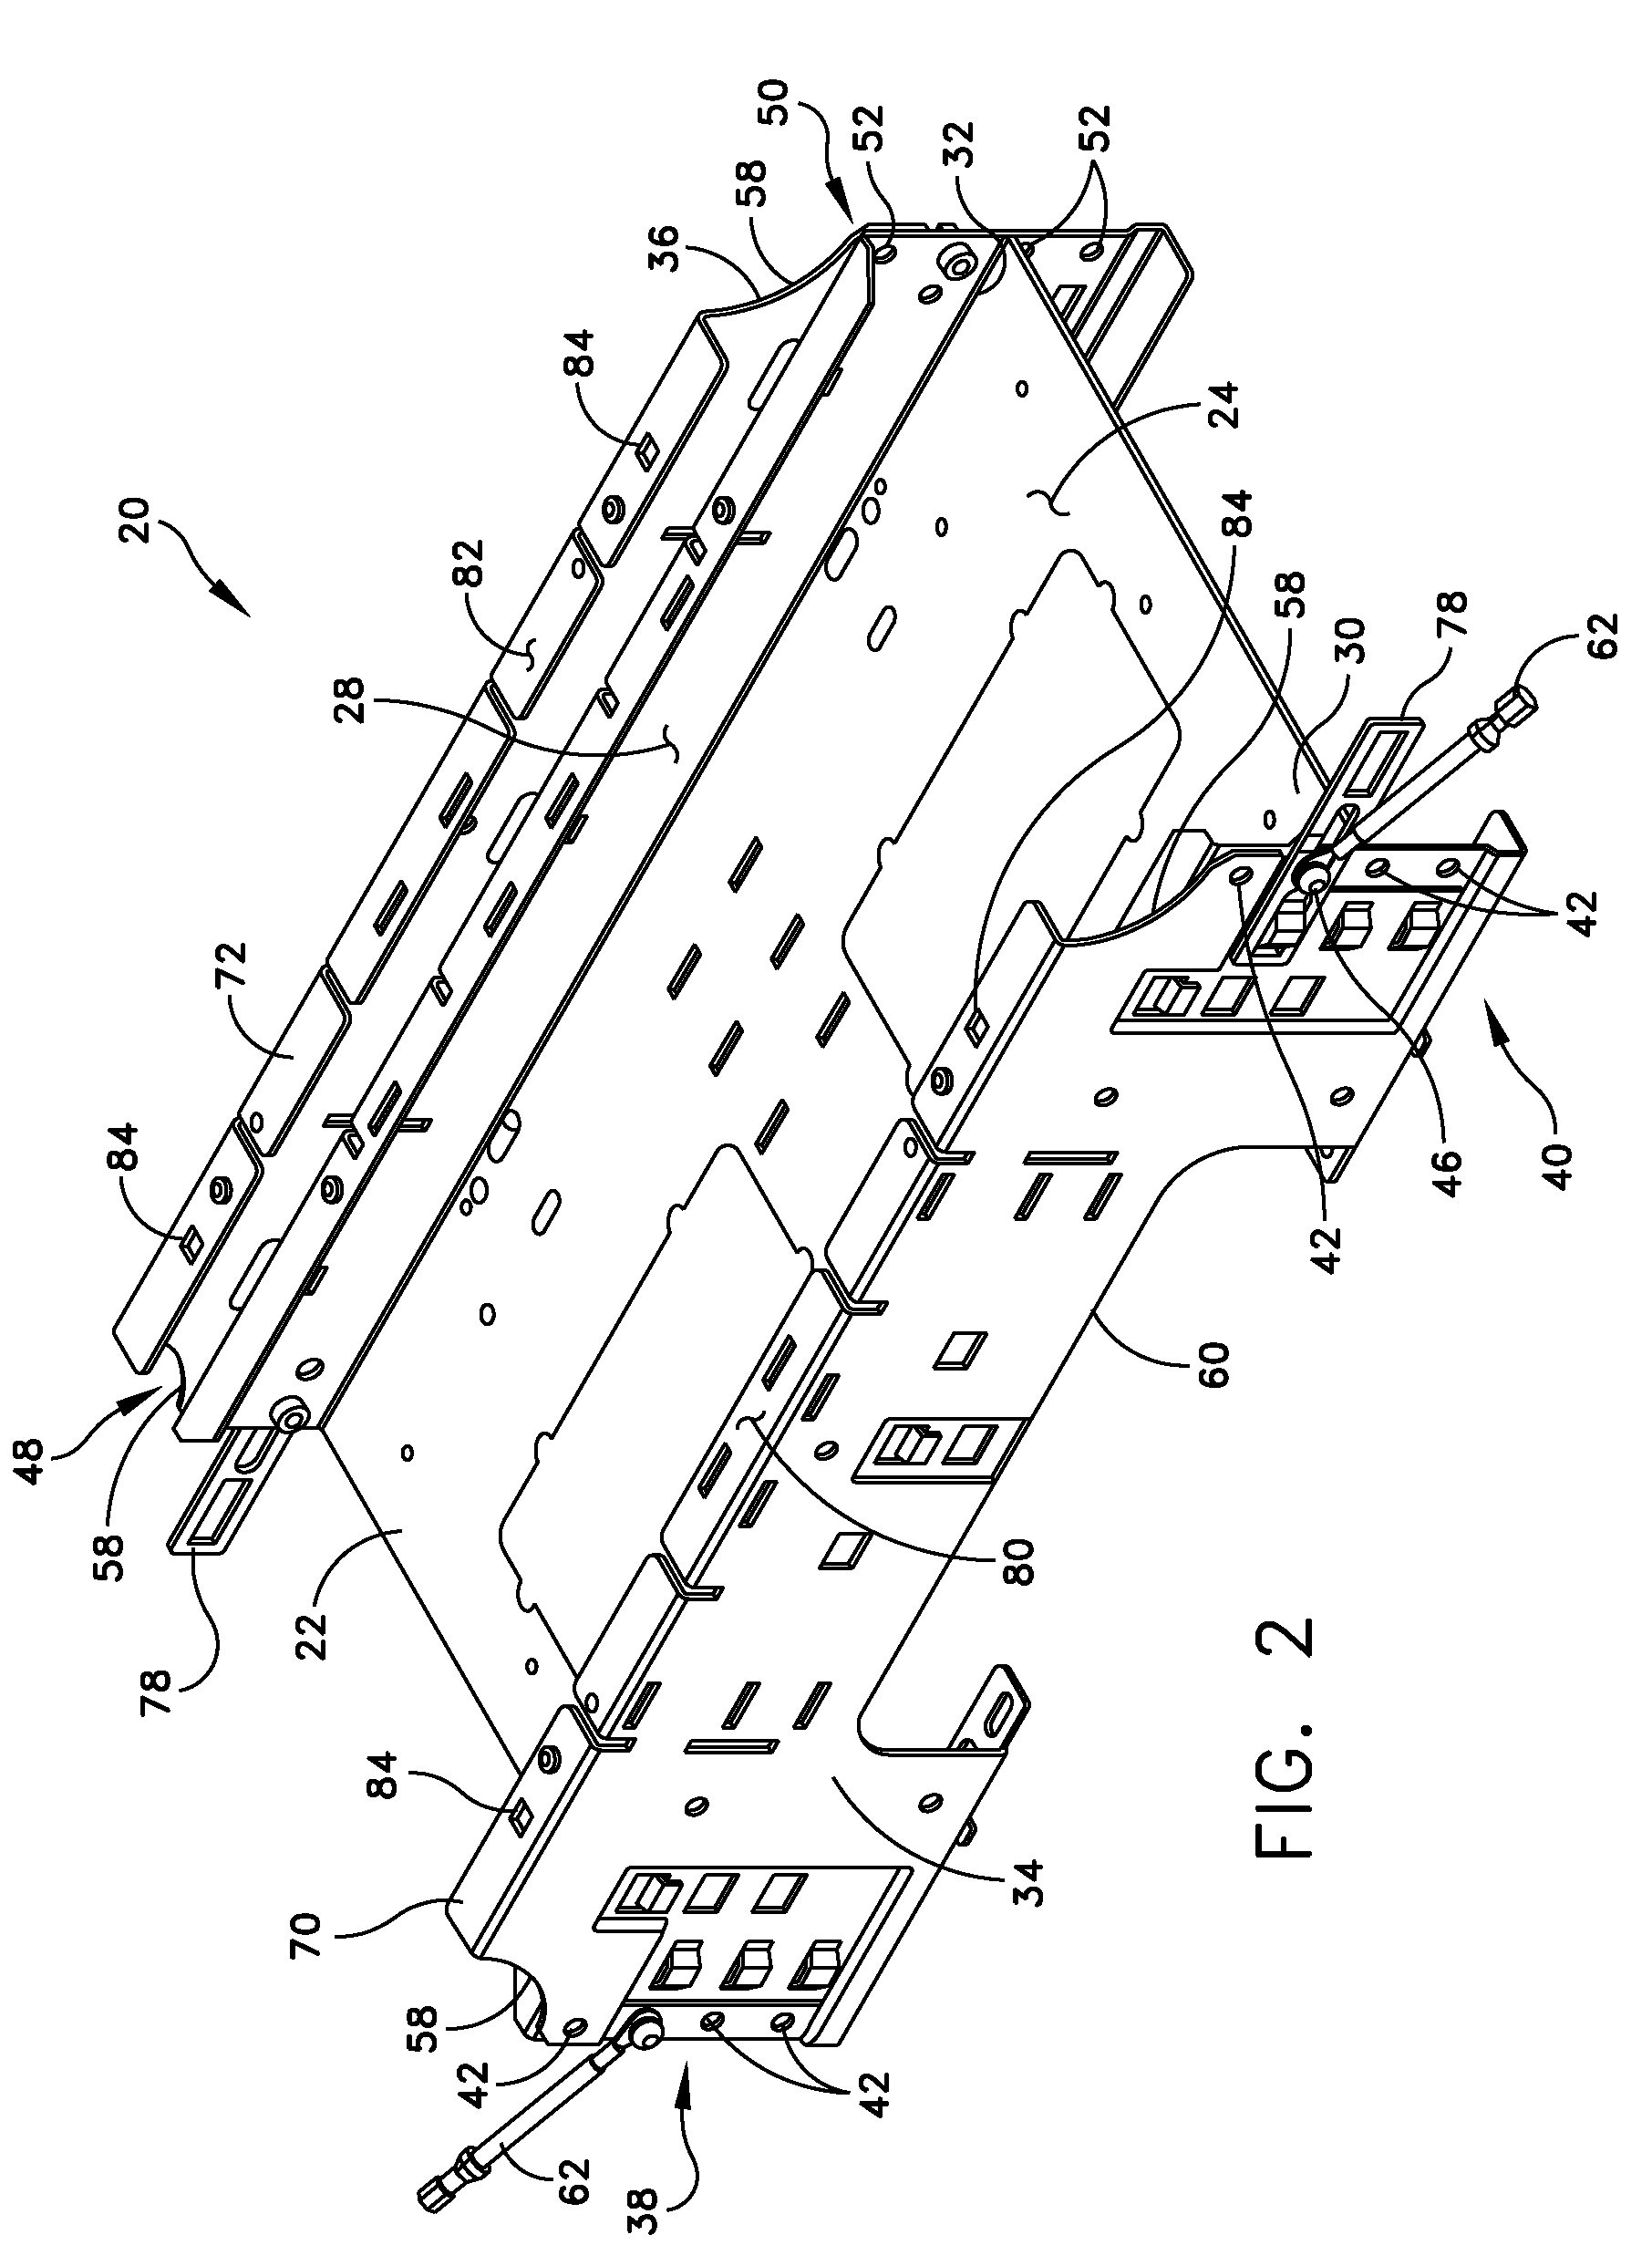 Systems and methods of managing cables